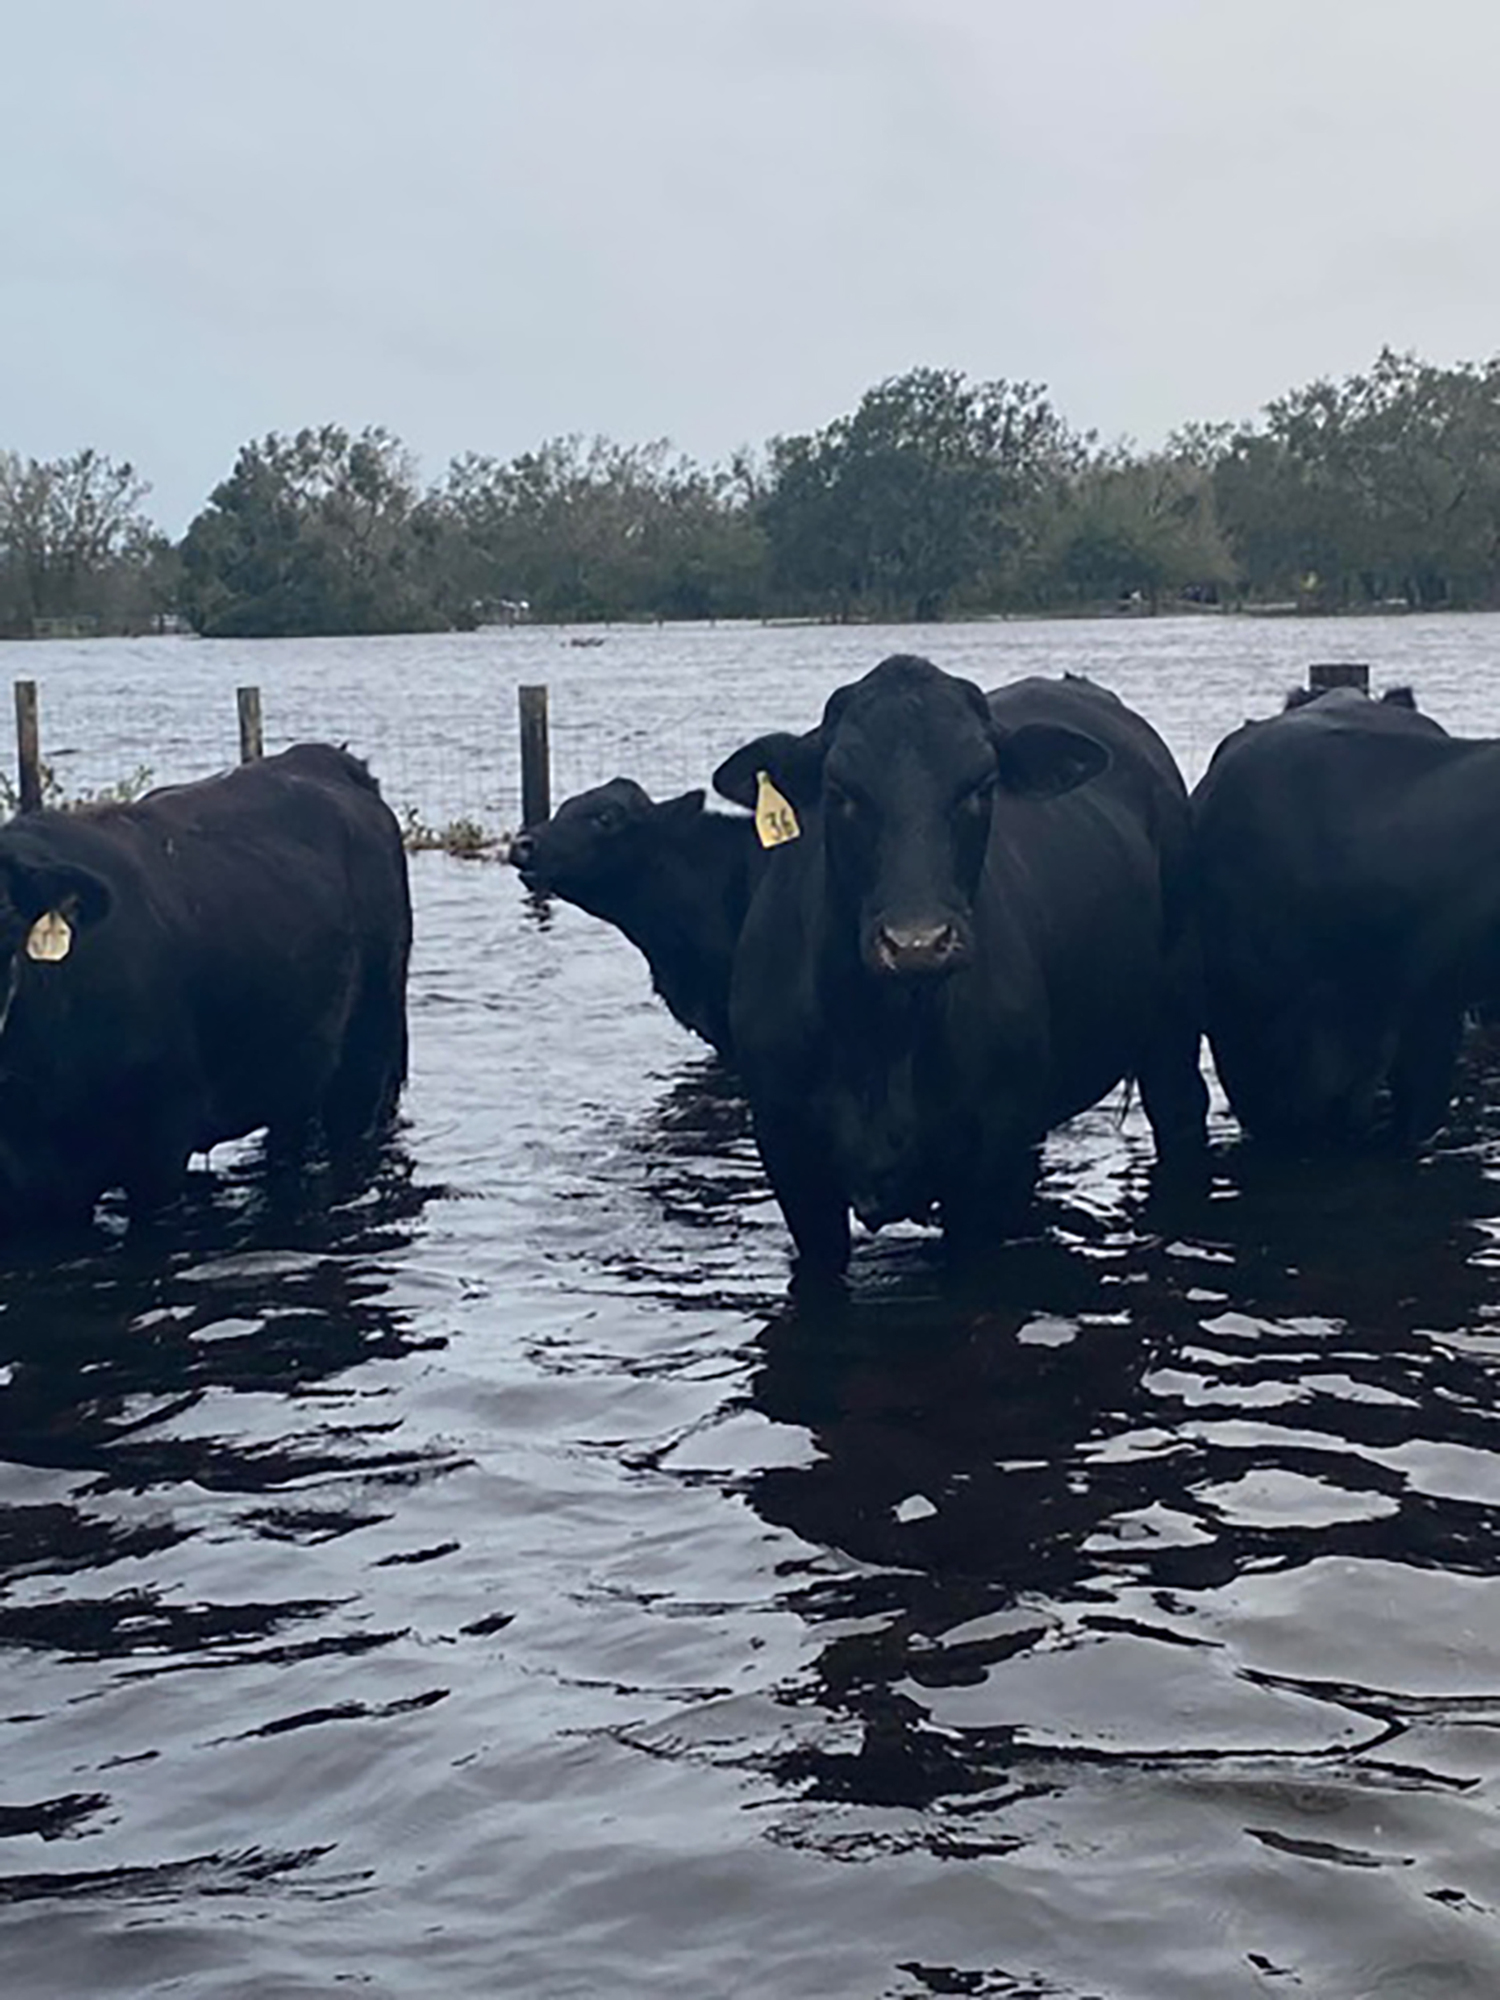 The cows at Rose and Clyde Alstrom's property in Myakka City wade through water that overflowed from the Myakka River. (Courtesy photo)